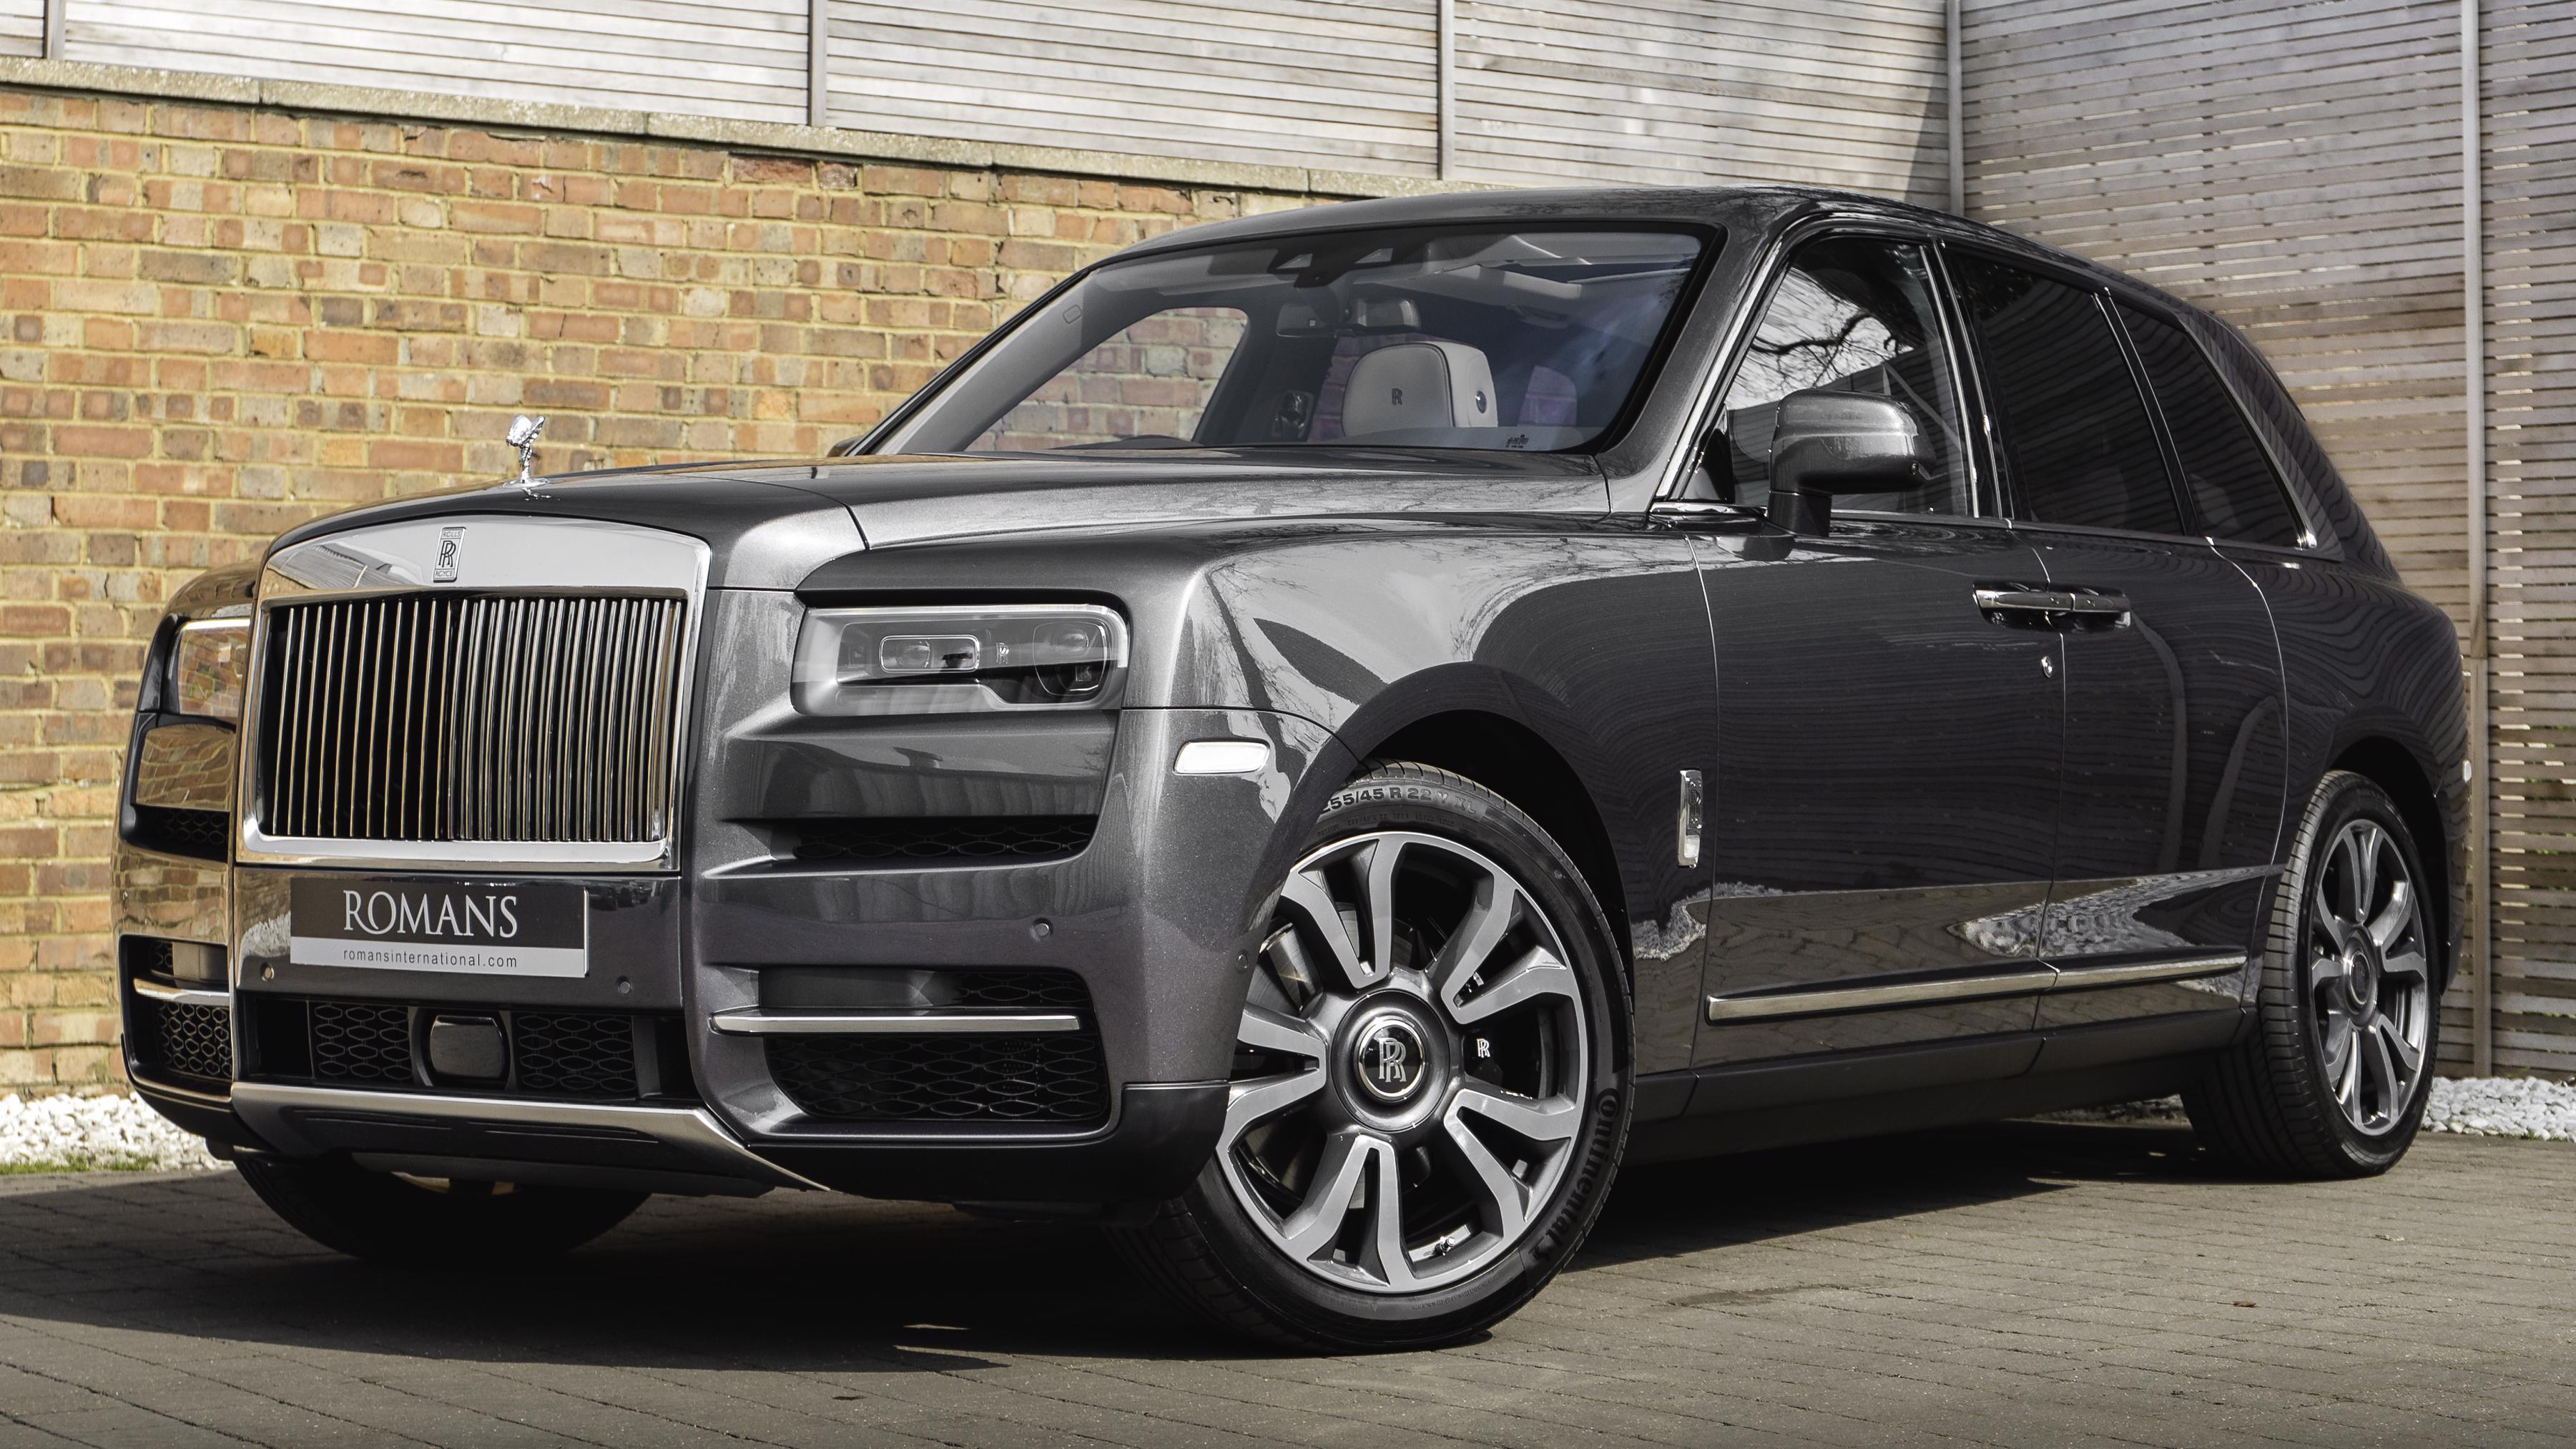  How Much Is A Rolls Royce Suv